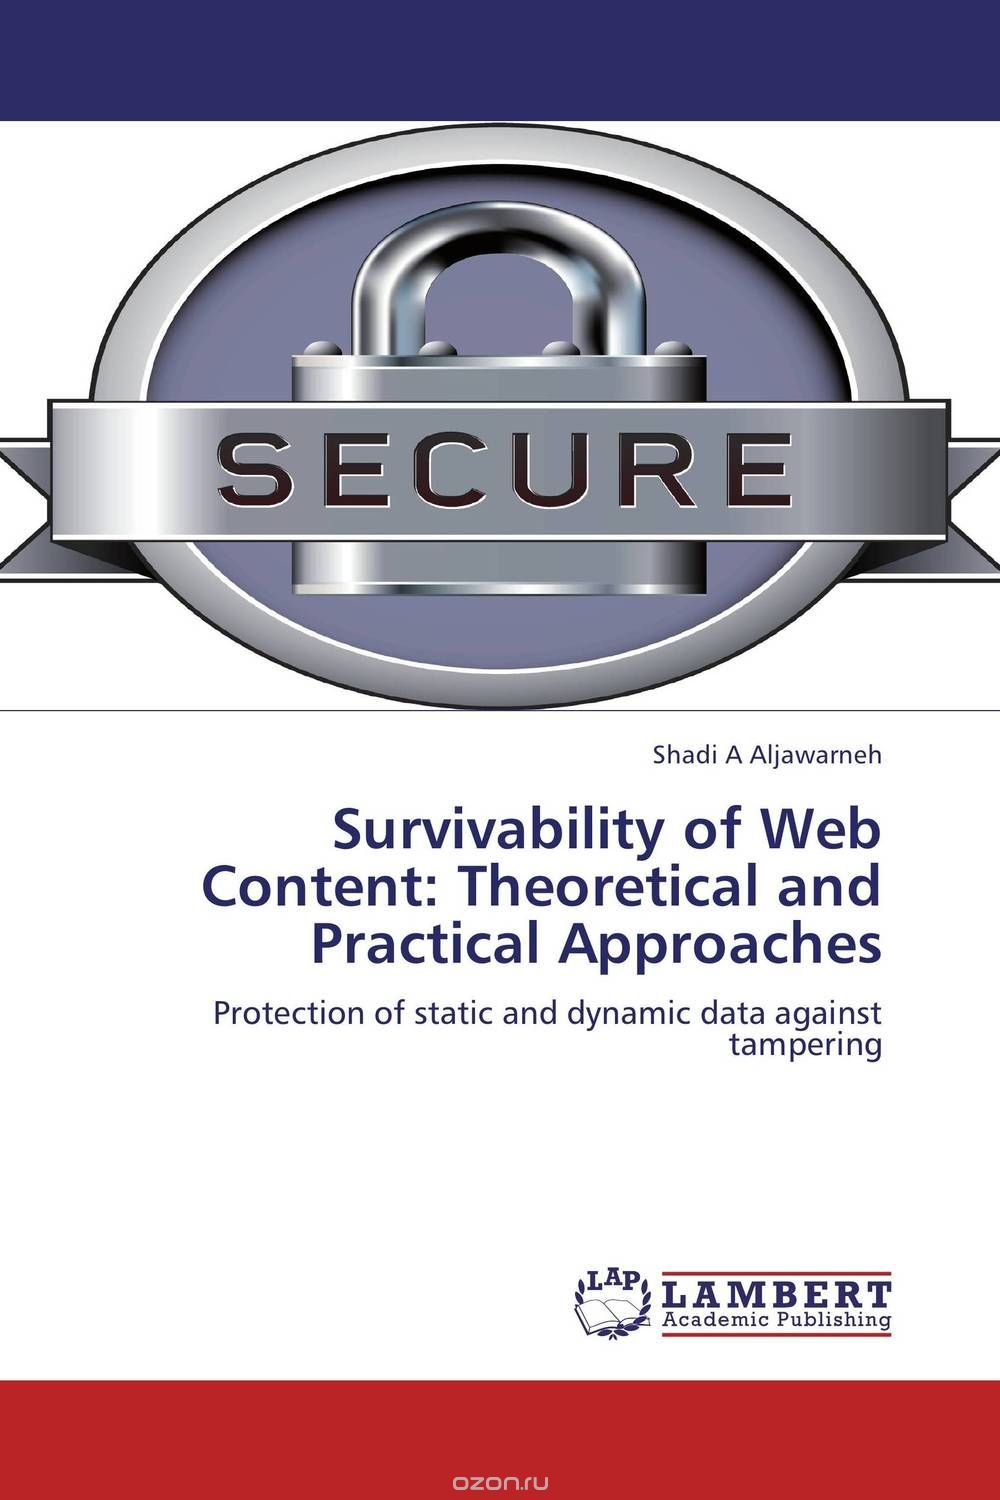 Скачать книгу "Survivability of Web Content: Theoretical and Practical Approaches"